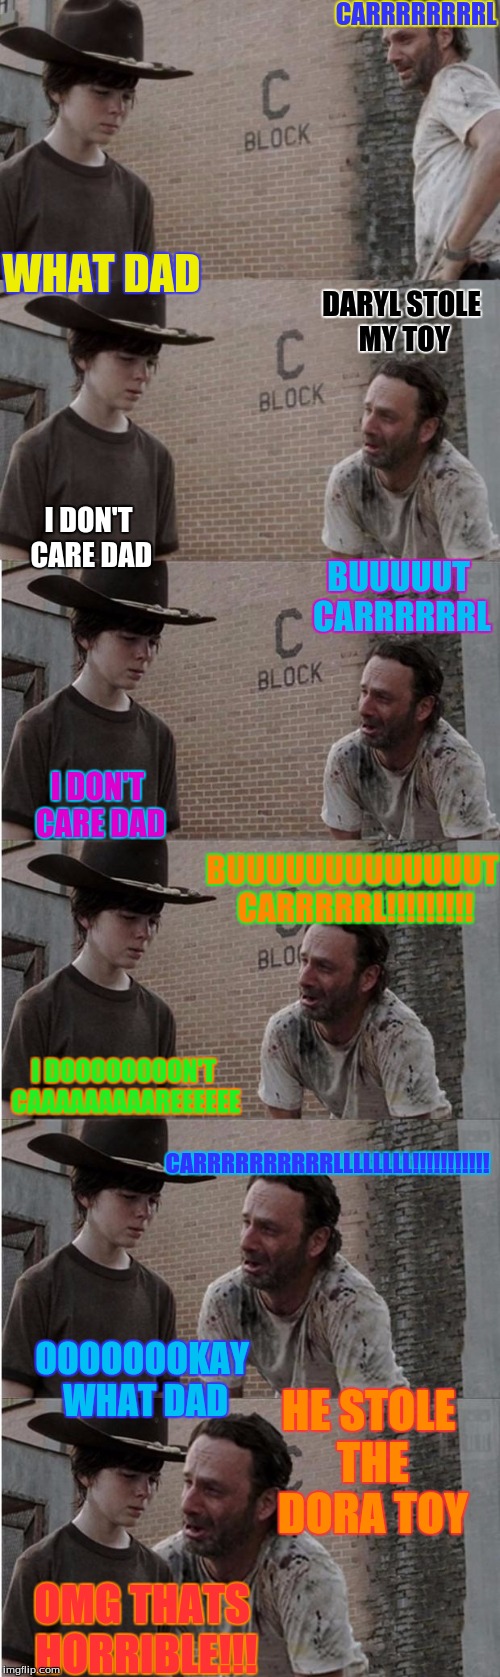 Rick and Carl Longer Meme | CARRRRRRRRL; WHAT DAD; DARYL STOLE MY TOY; I DON'T CARE DAD; BUUUUUT CARRRRRRL; I DON'T CARE DAD; BUUUUUUUUUUUUUT CARRRRRL!!!!!!!!! I DOOOOOOOON'T CAAAAAAAAAREEEEEE; CARRRRRRRRRRLLLLLLLL!!!!!!!!!!! HE STOLE THE DORA TOY; OOOOOOOKAY WHAT DAD; OMG THATS HORRIBLE!!! | image tagged in memes,rick and carl longer | made w/ Imgflip meme maker